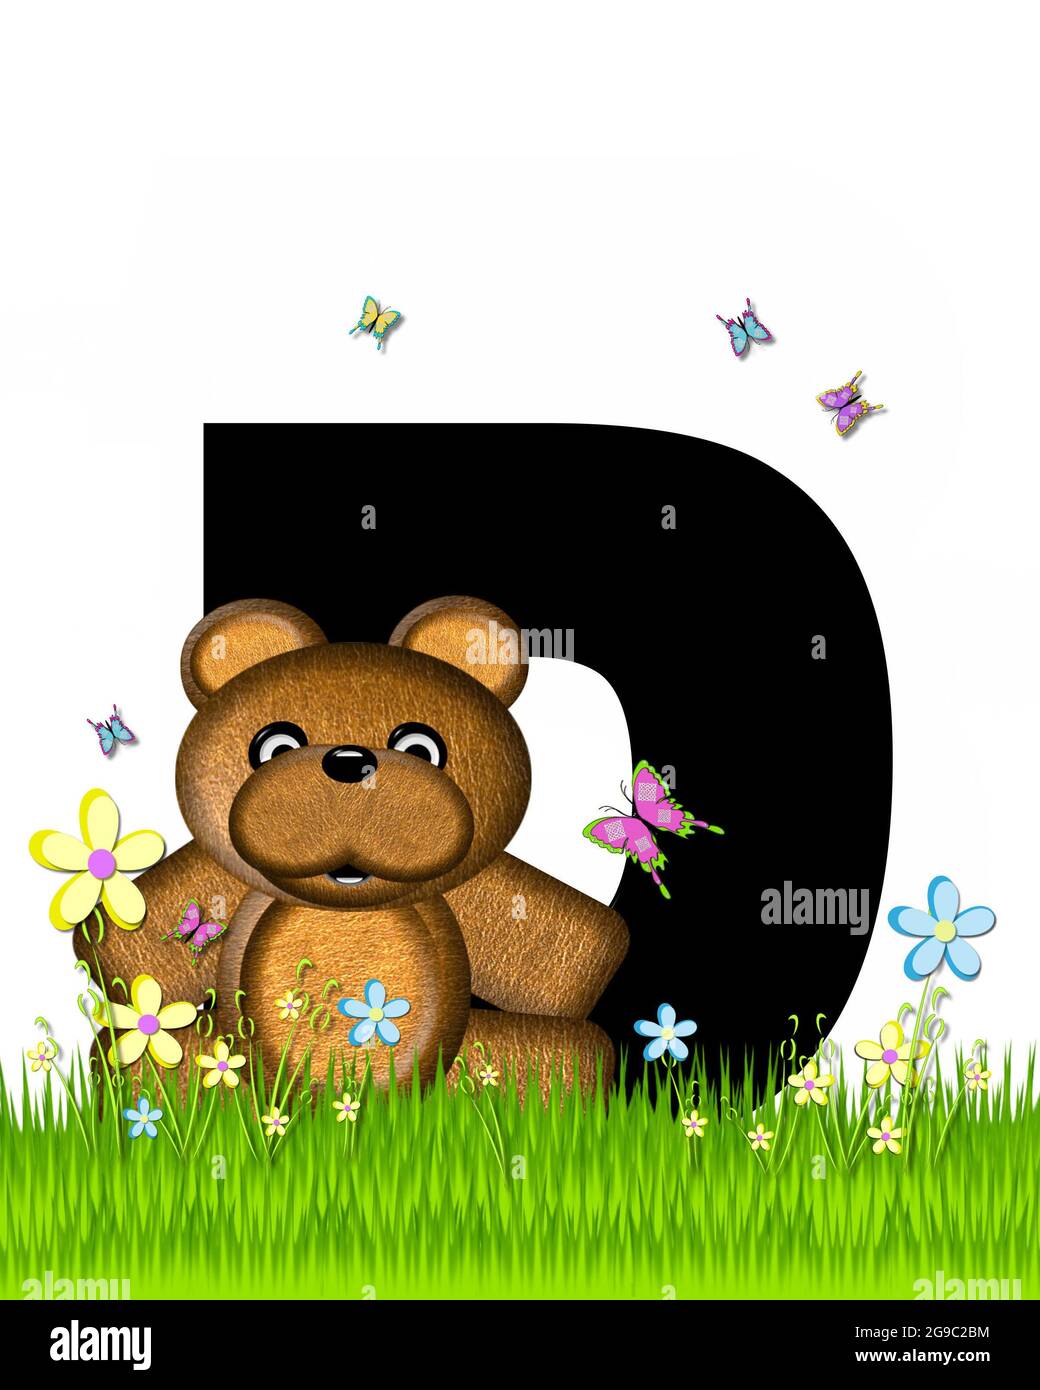 The letter D, in the alphabet set 'Teddy Butterfly Field,' is black.  Teddy bear chases colorful butterflies across a grassy field with wildflowers. Stock Photo